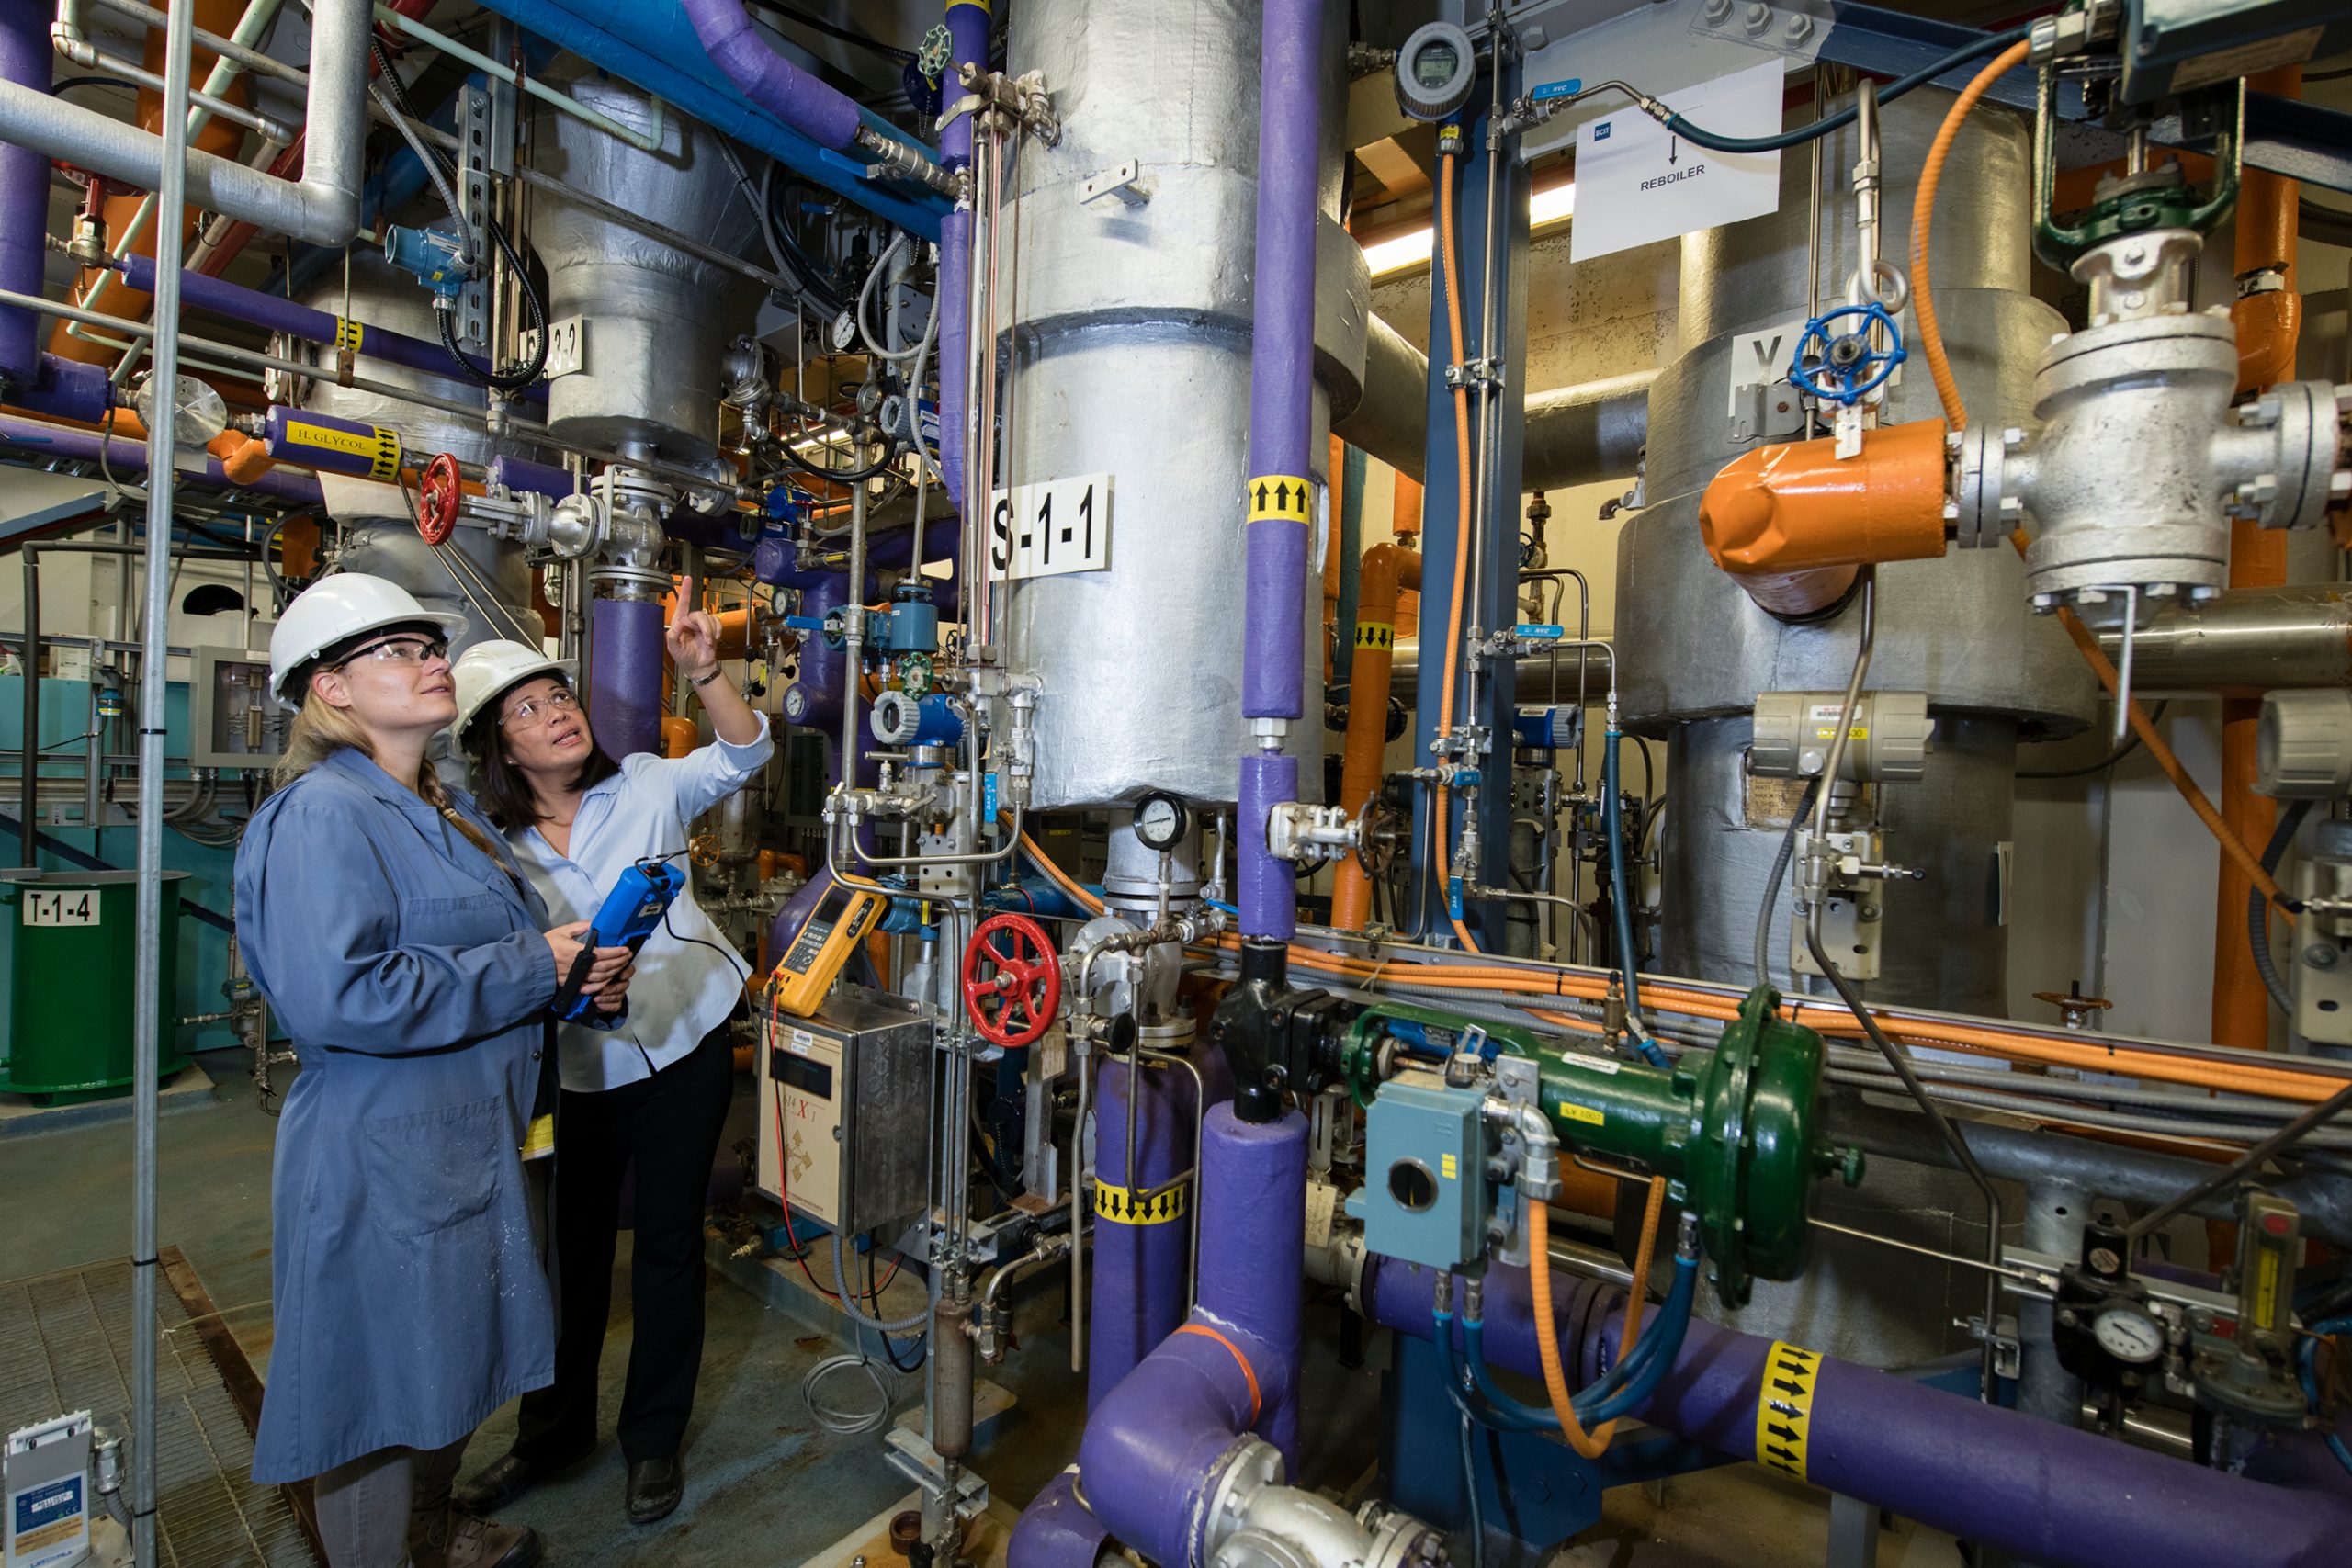 a female student and instructor in a boiler room staring up at the machiner.